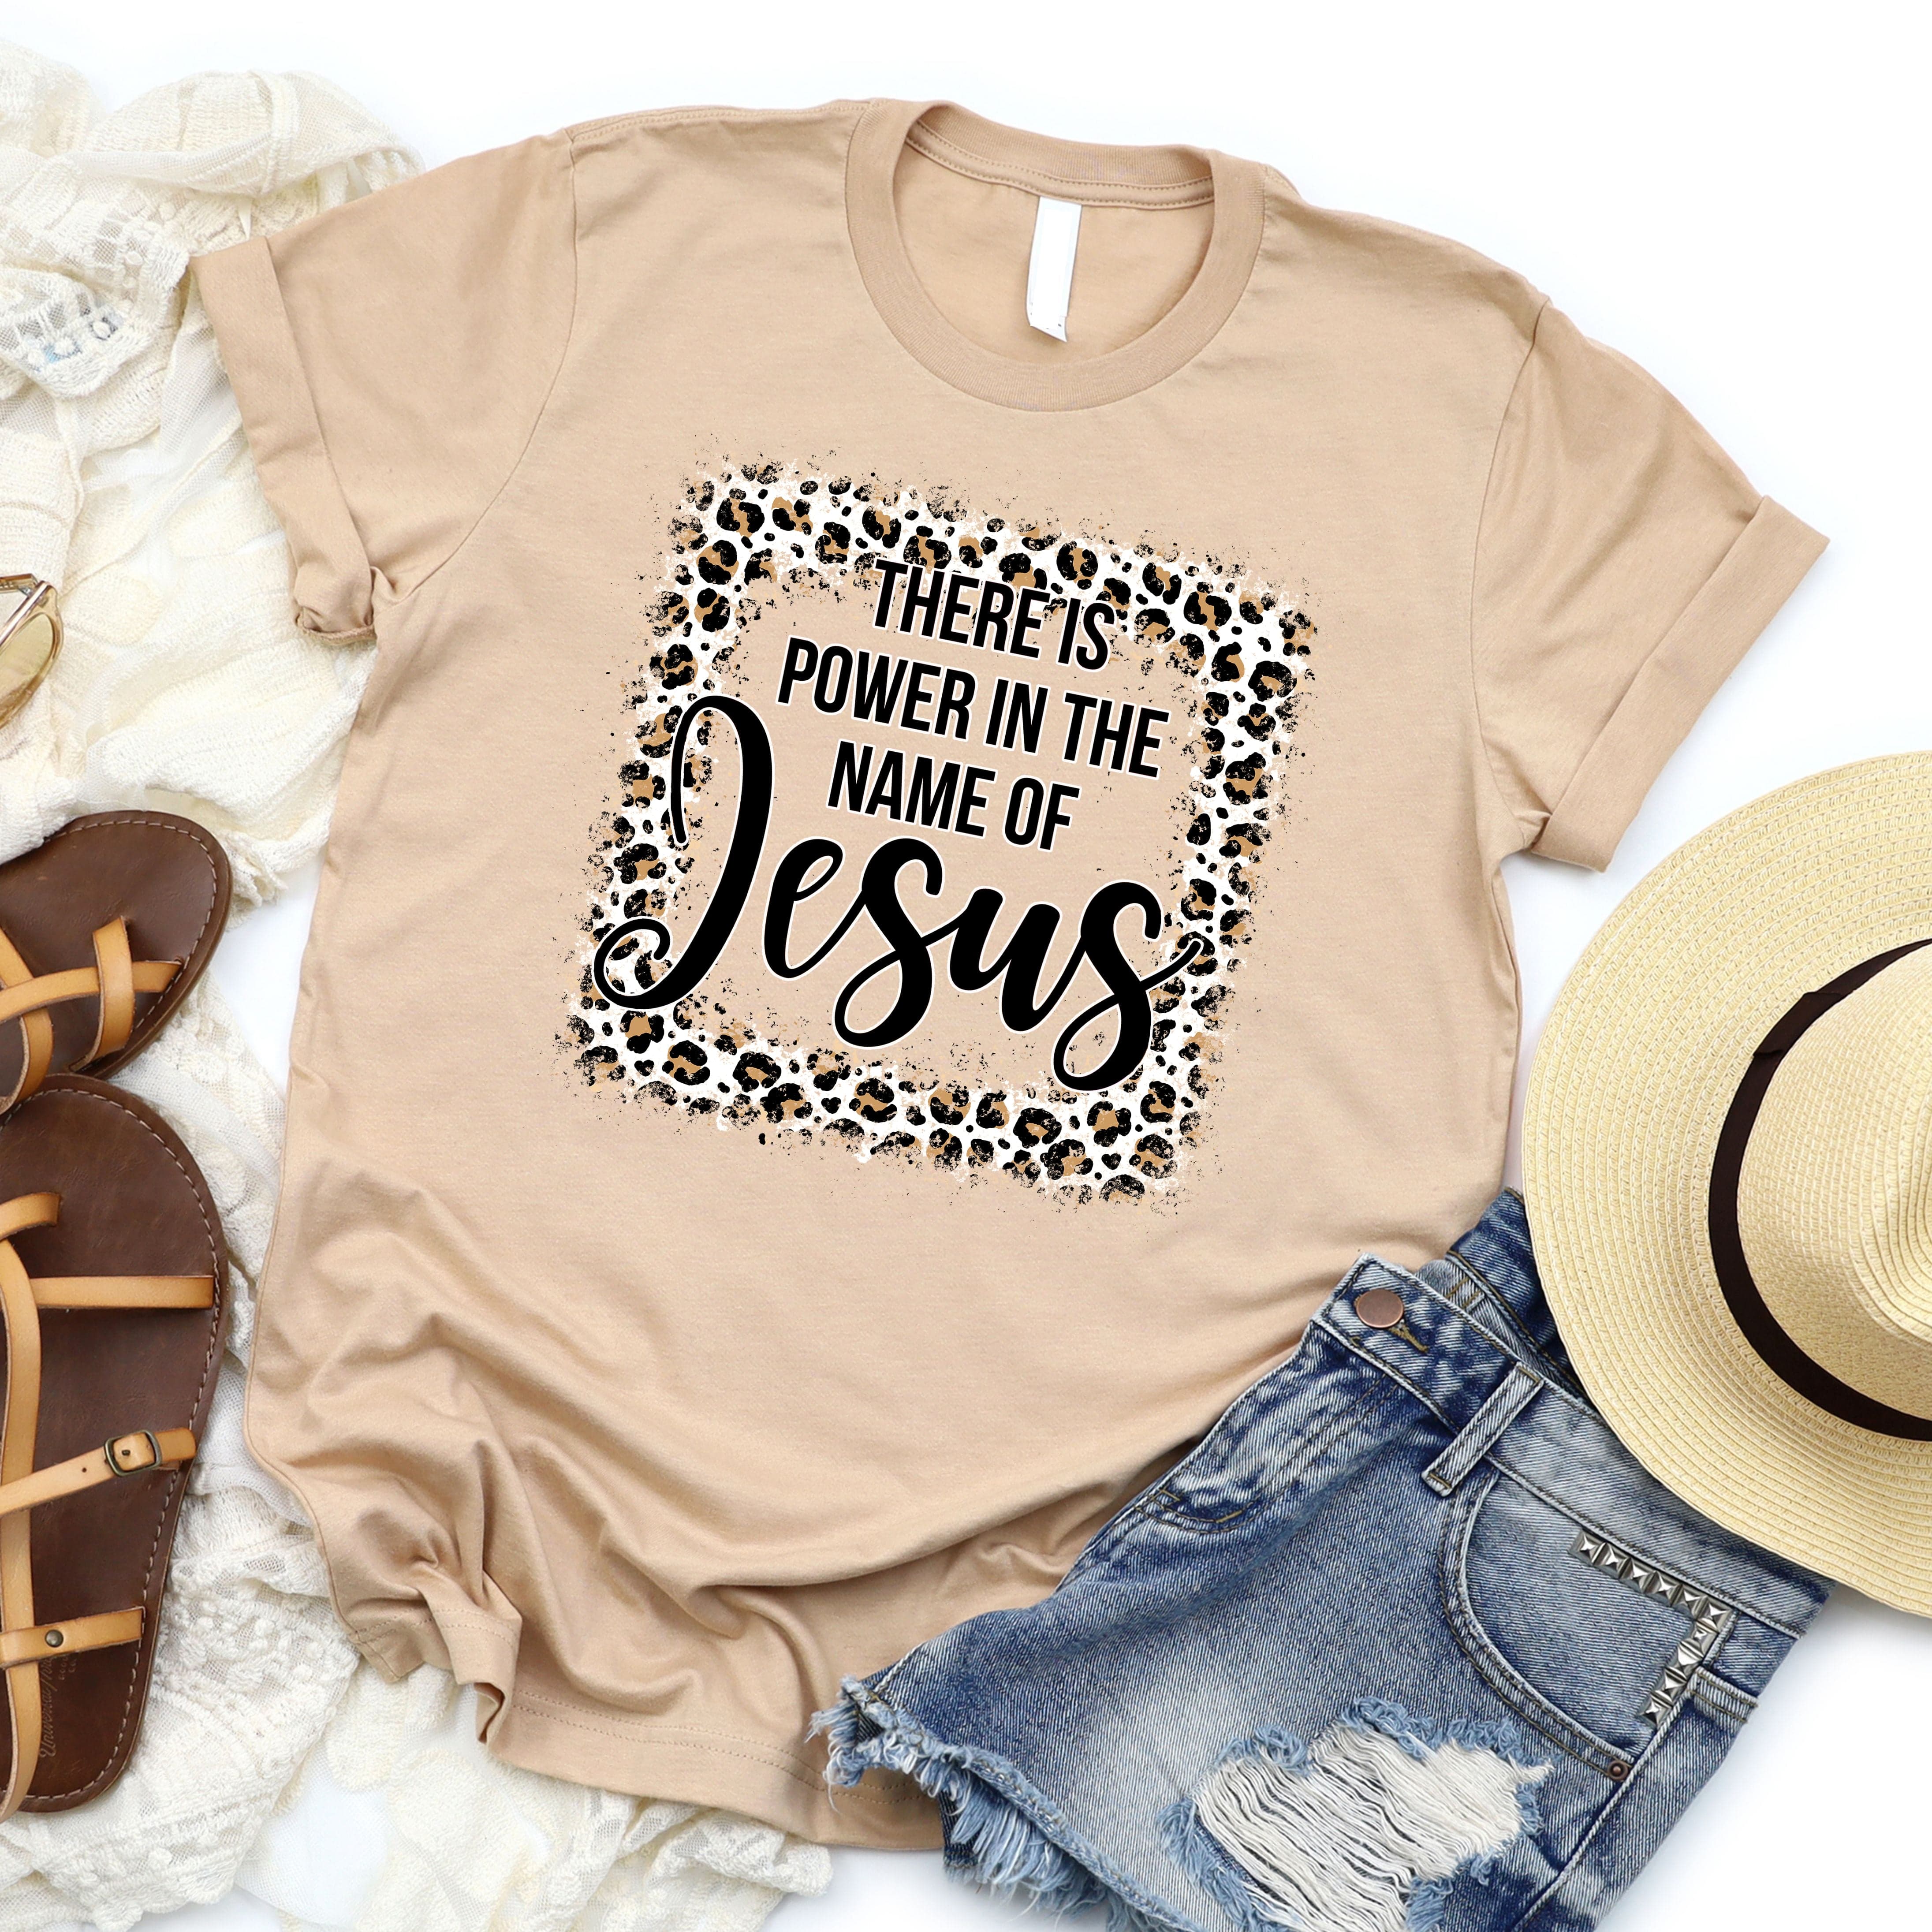 There Is Power In The Name of Jesus Graphi T- Shirt - S - 2X